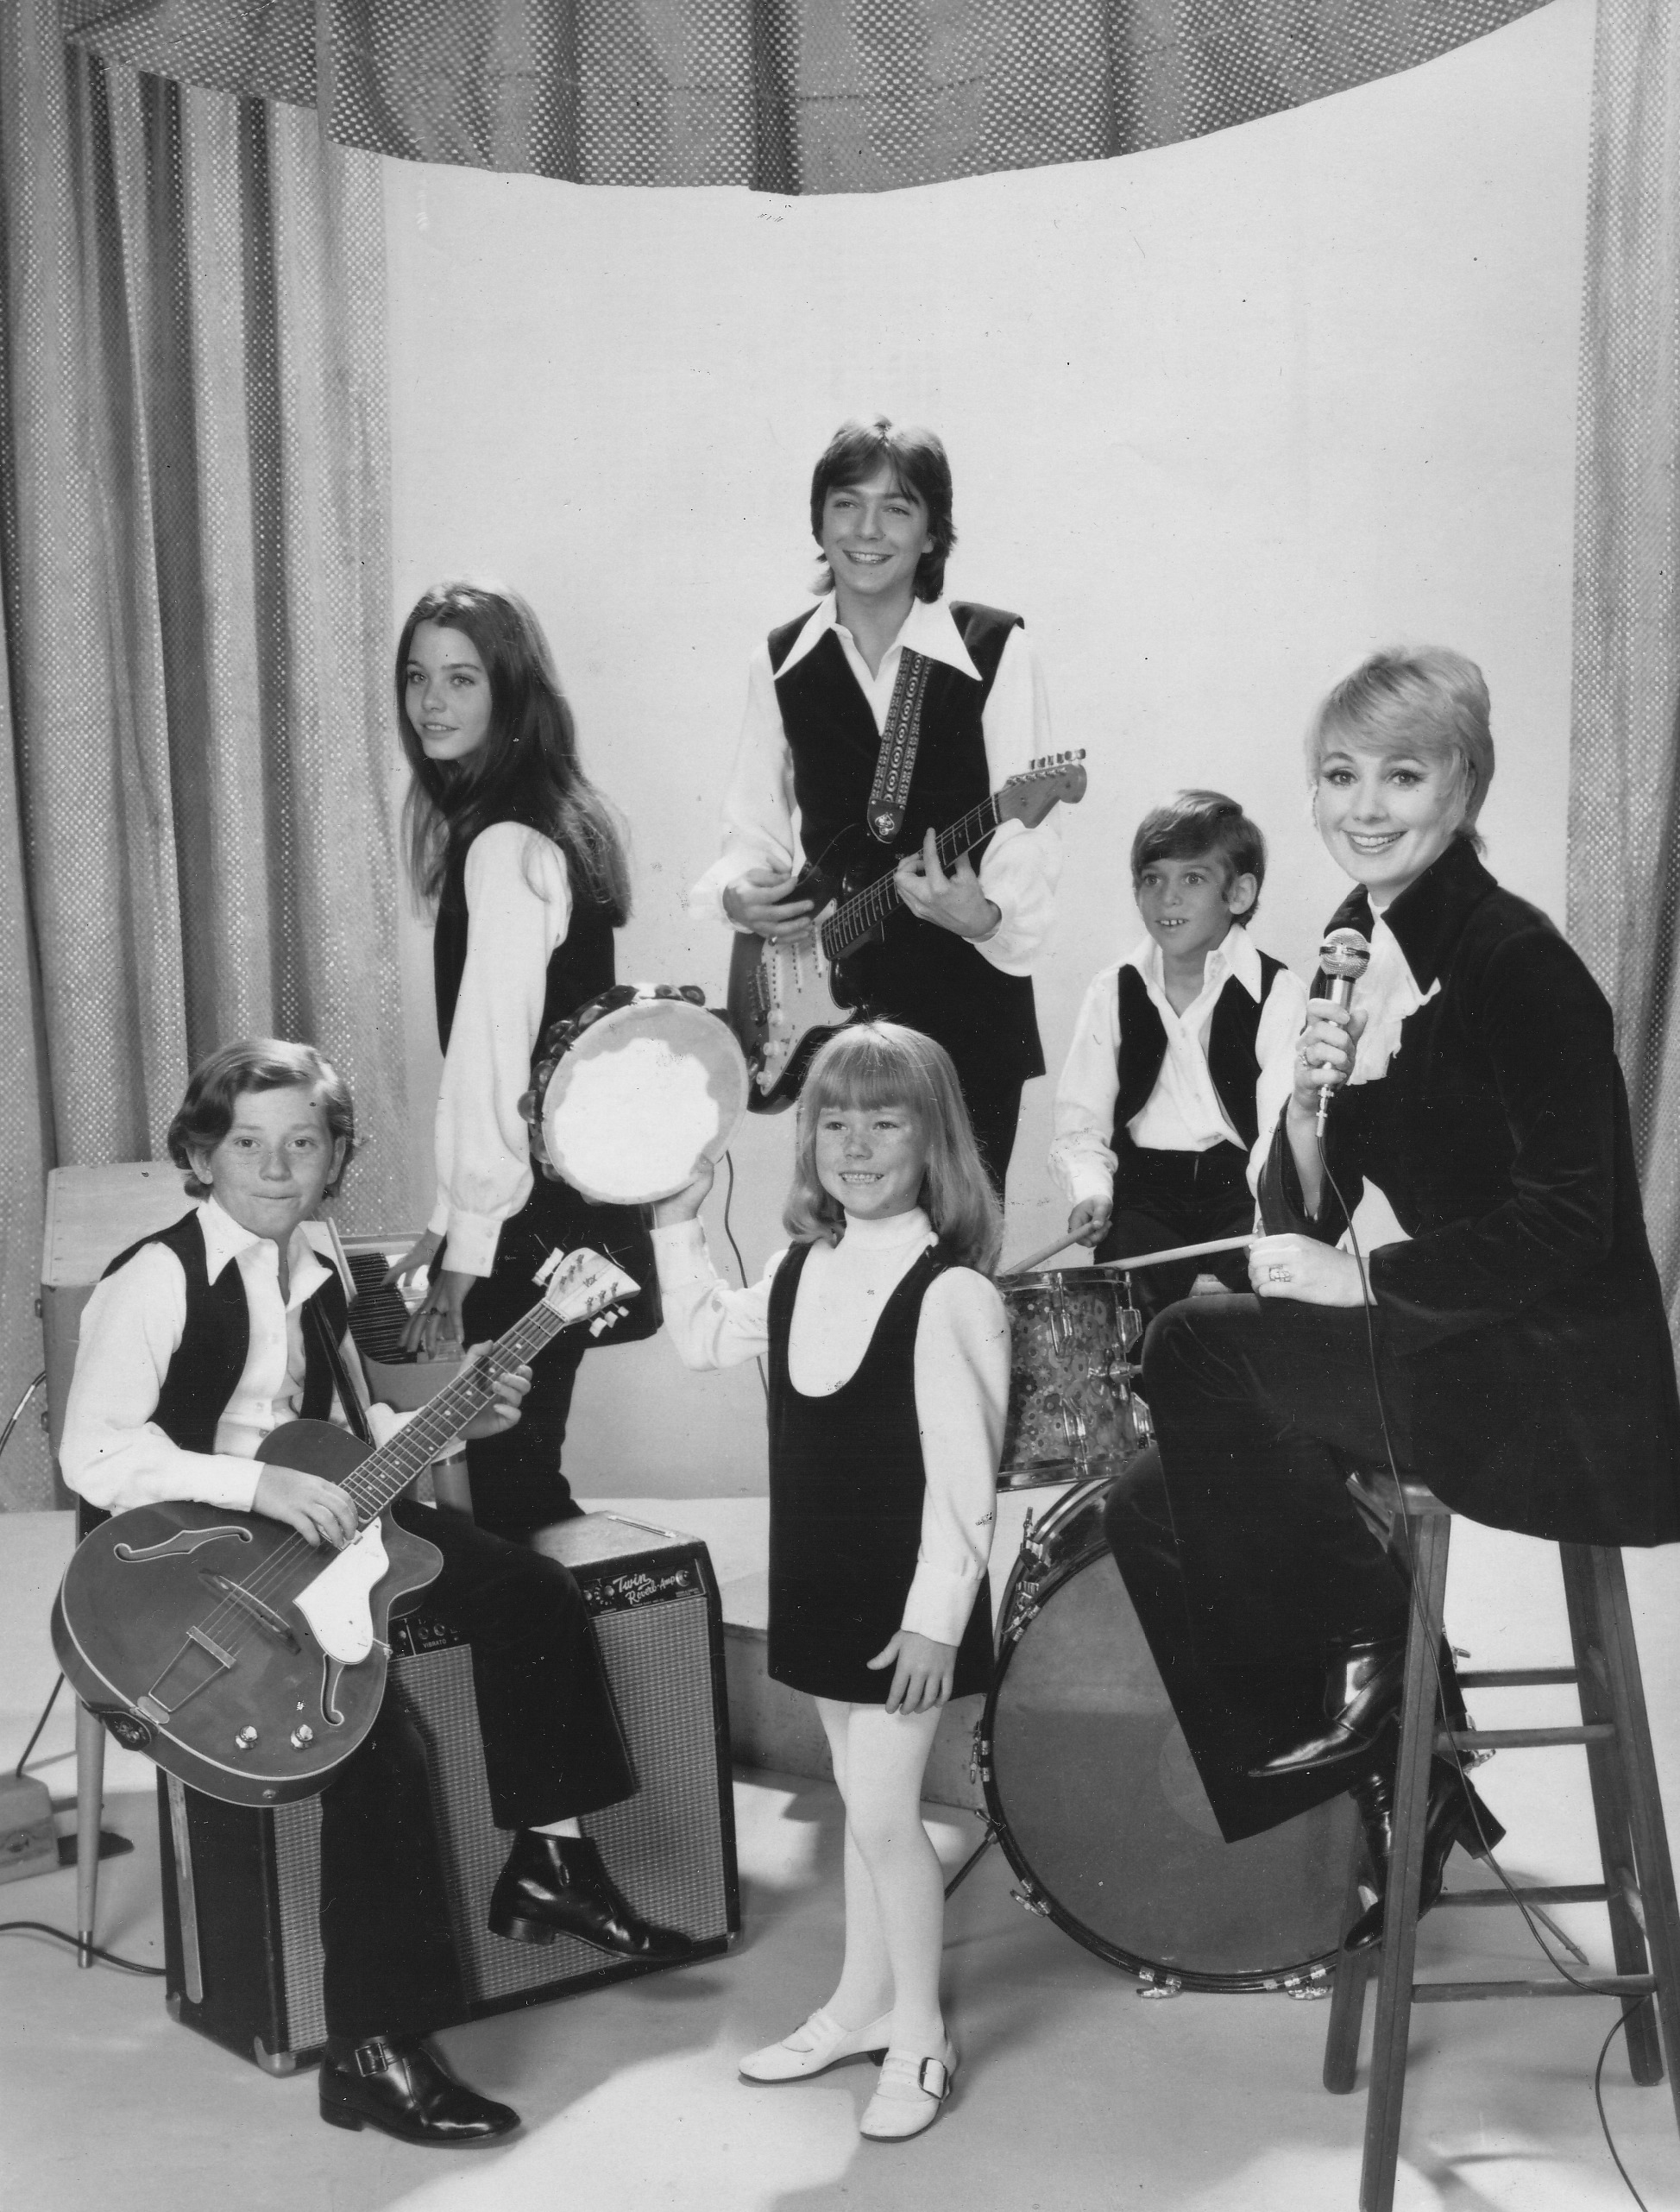 http://upload.wikimedia.org/wikipedia/commons/7/77/The_Partridge_Family_Cast_1970_No_2.jpg